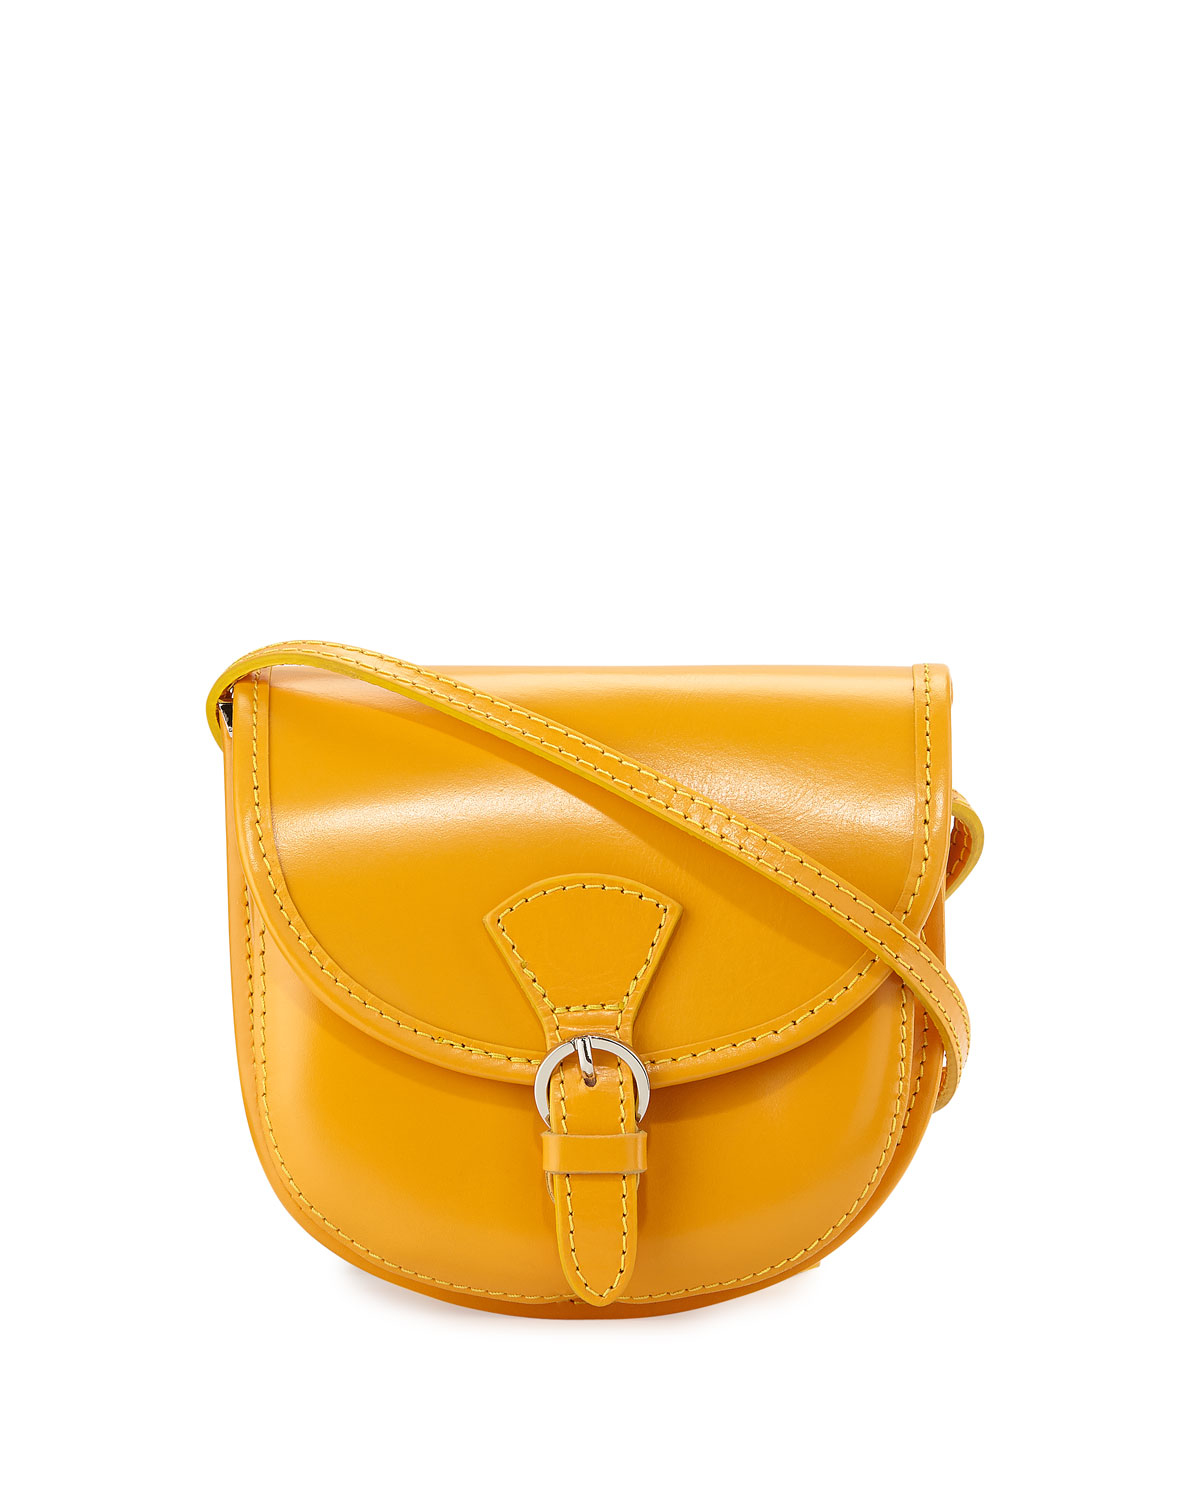 Neiman Marcus Buckle Leather Saddle Bag in Yellow - Lyst